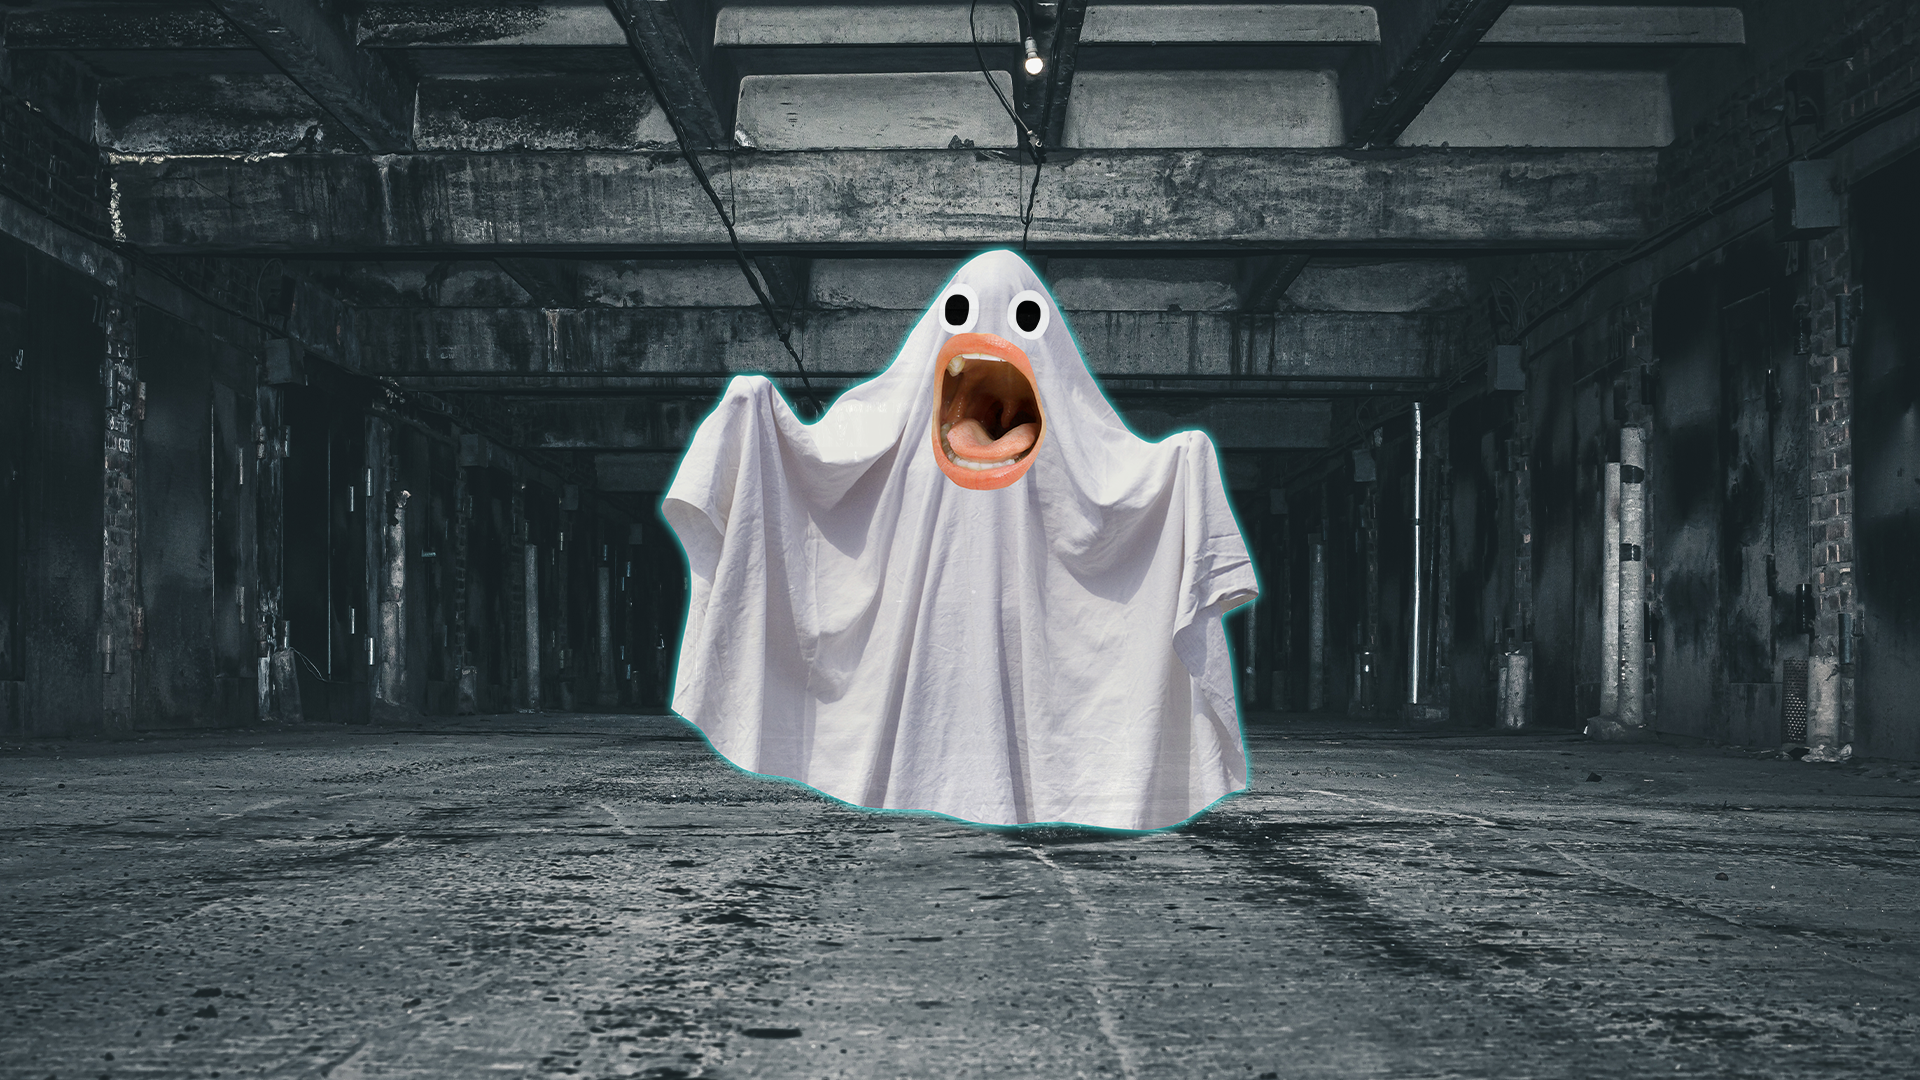 Beano ghost in spooky abandoned location